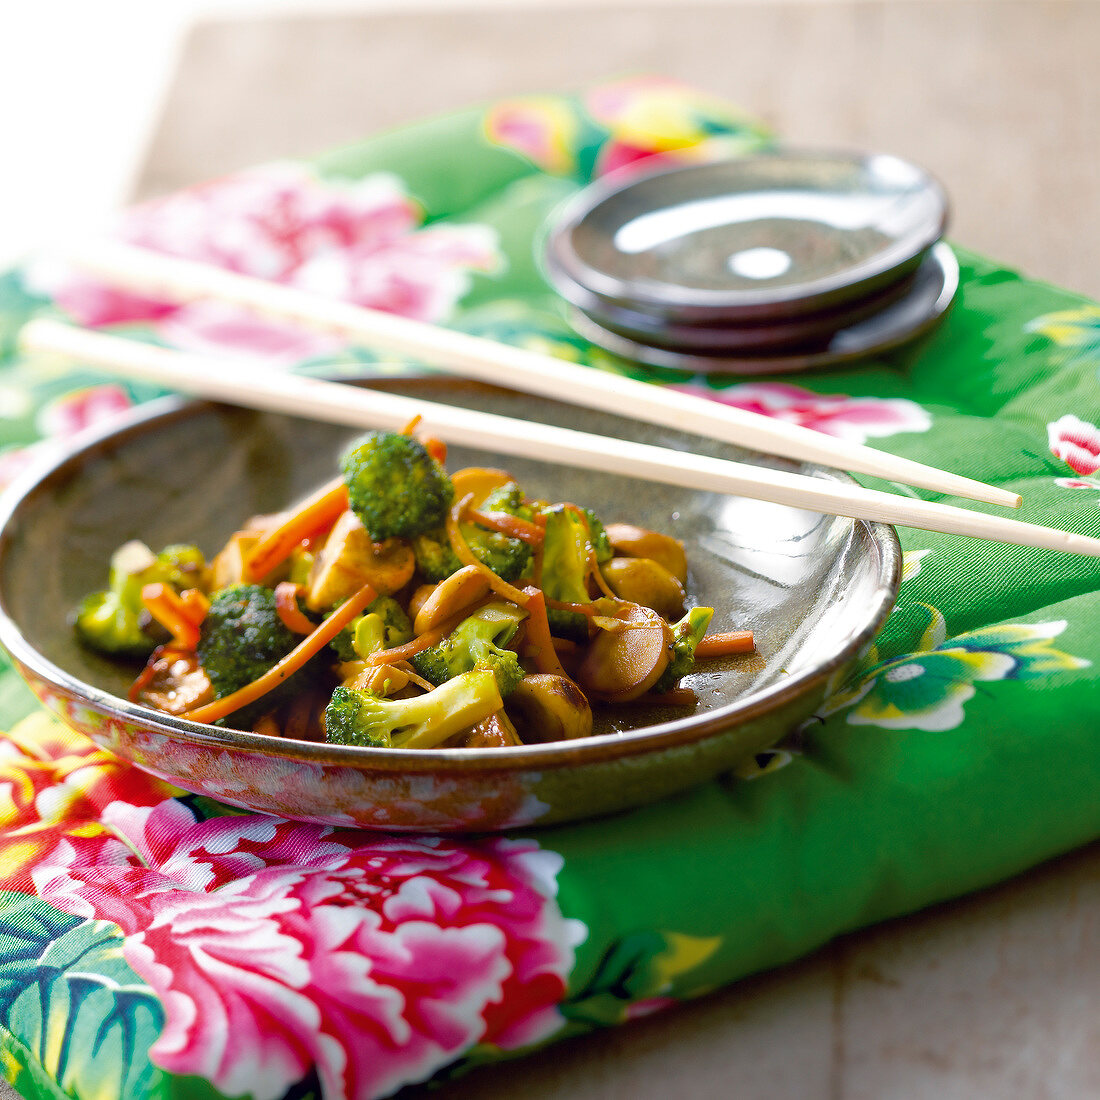 Sauteed vegetables with soya sauce